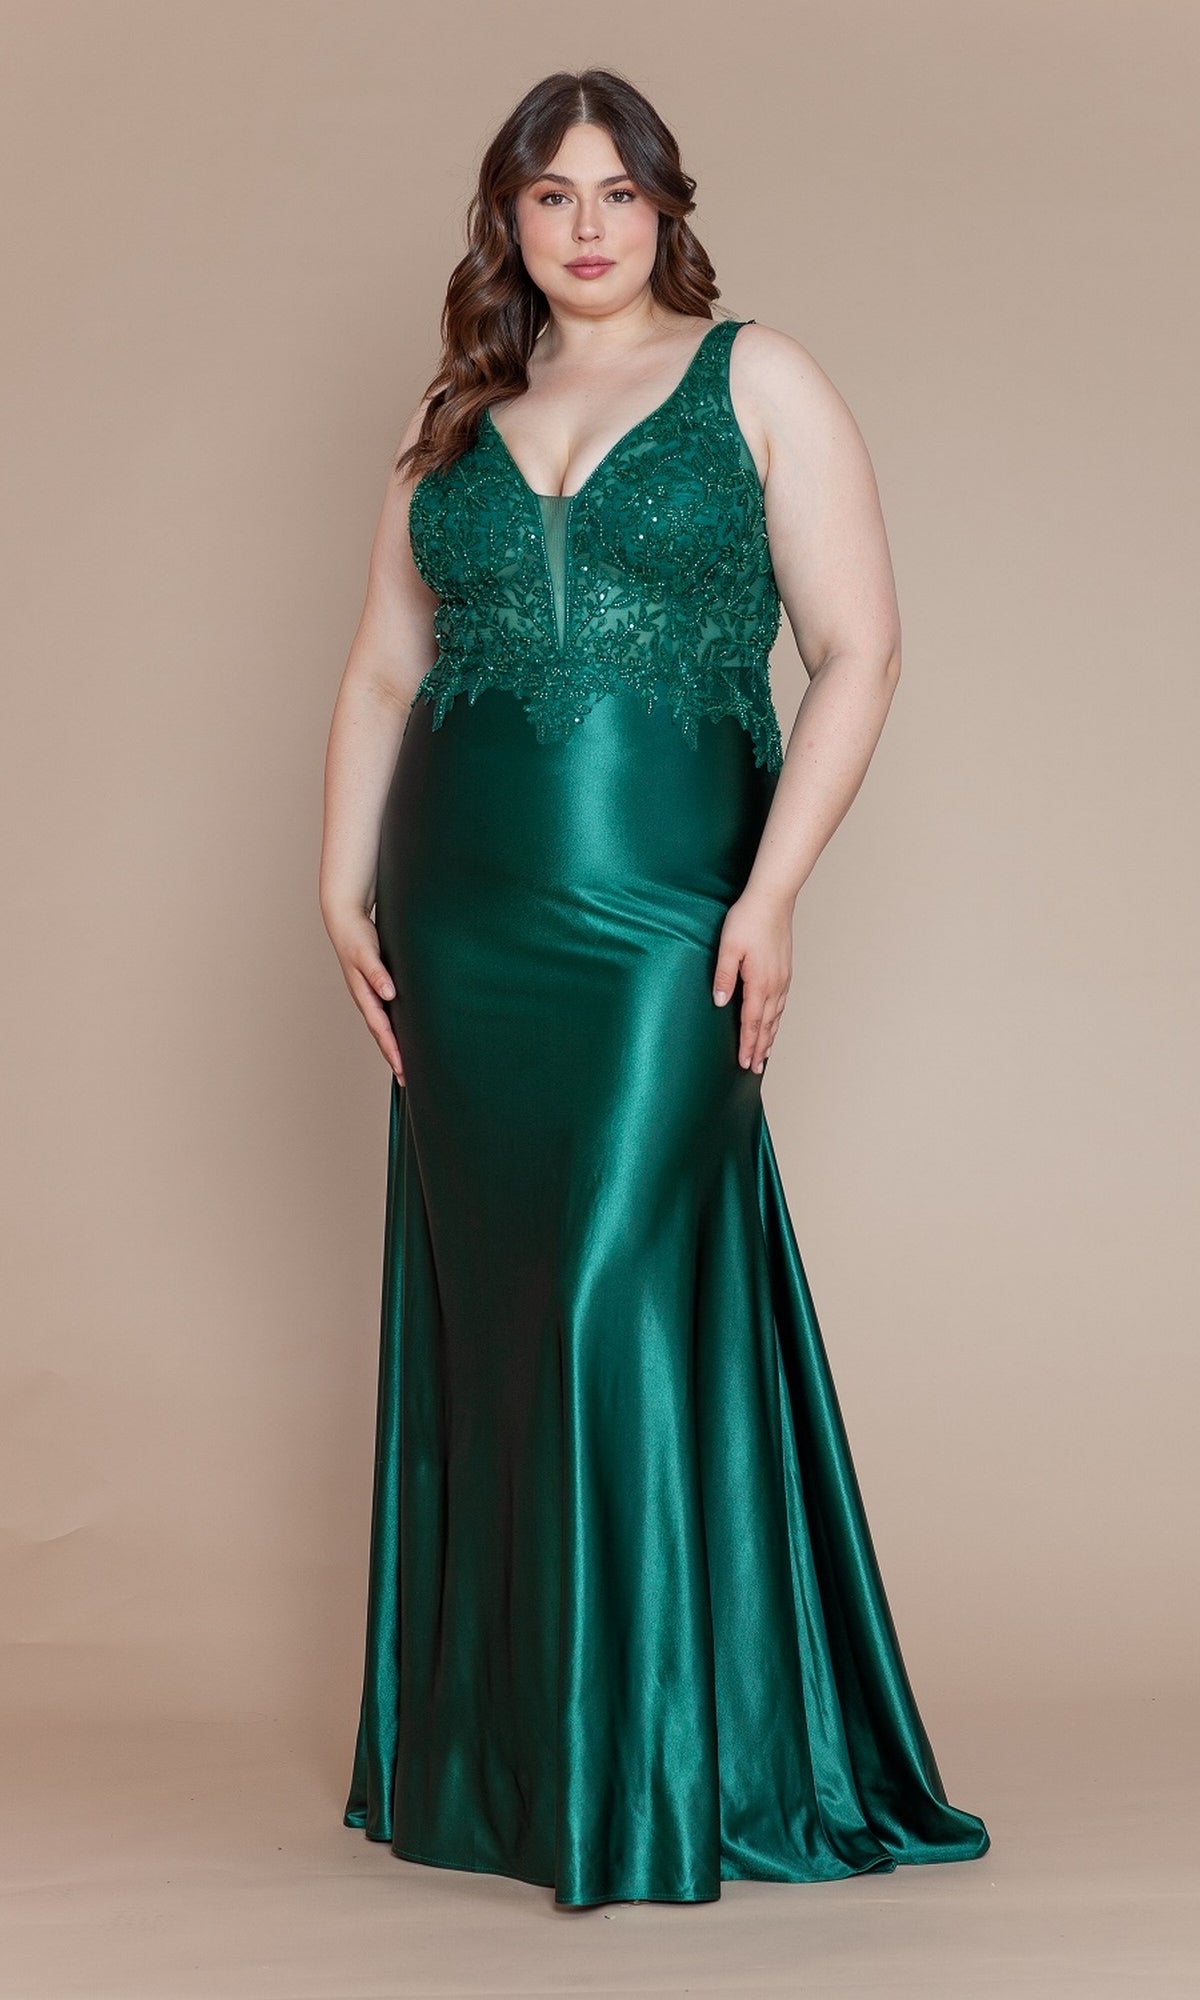 Embroidered-Bodice Plus-Size Long Prom Dress W1160